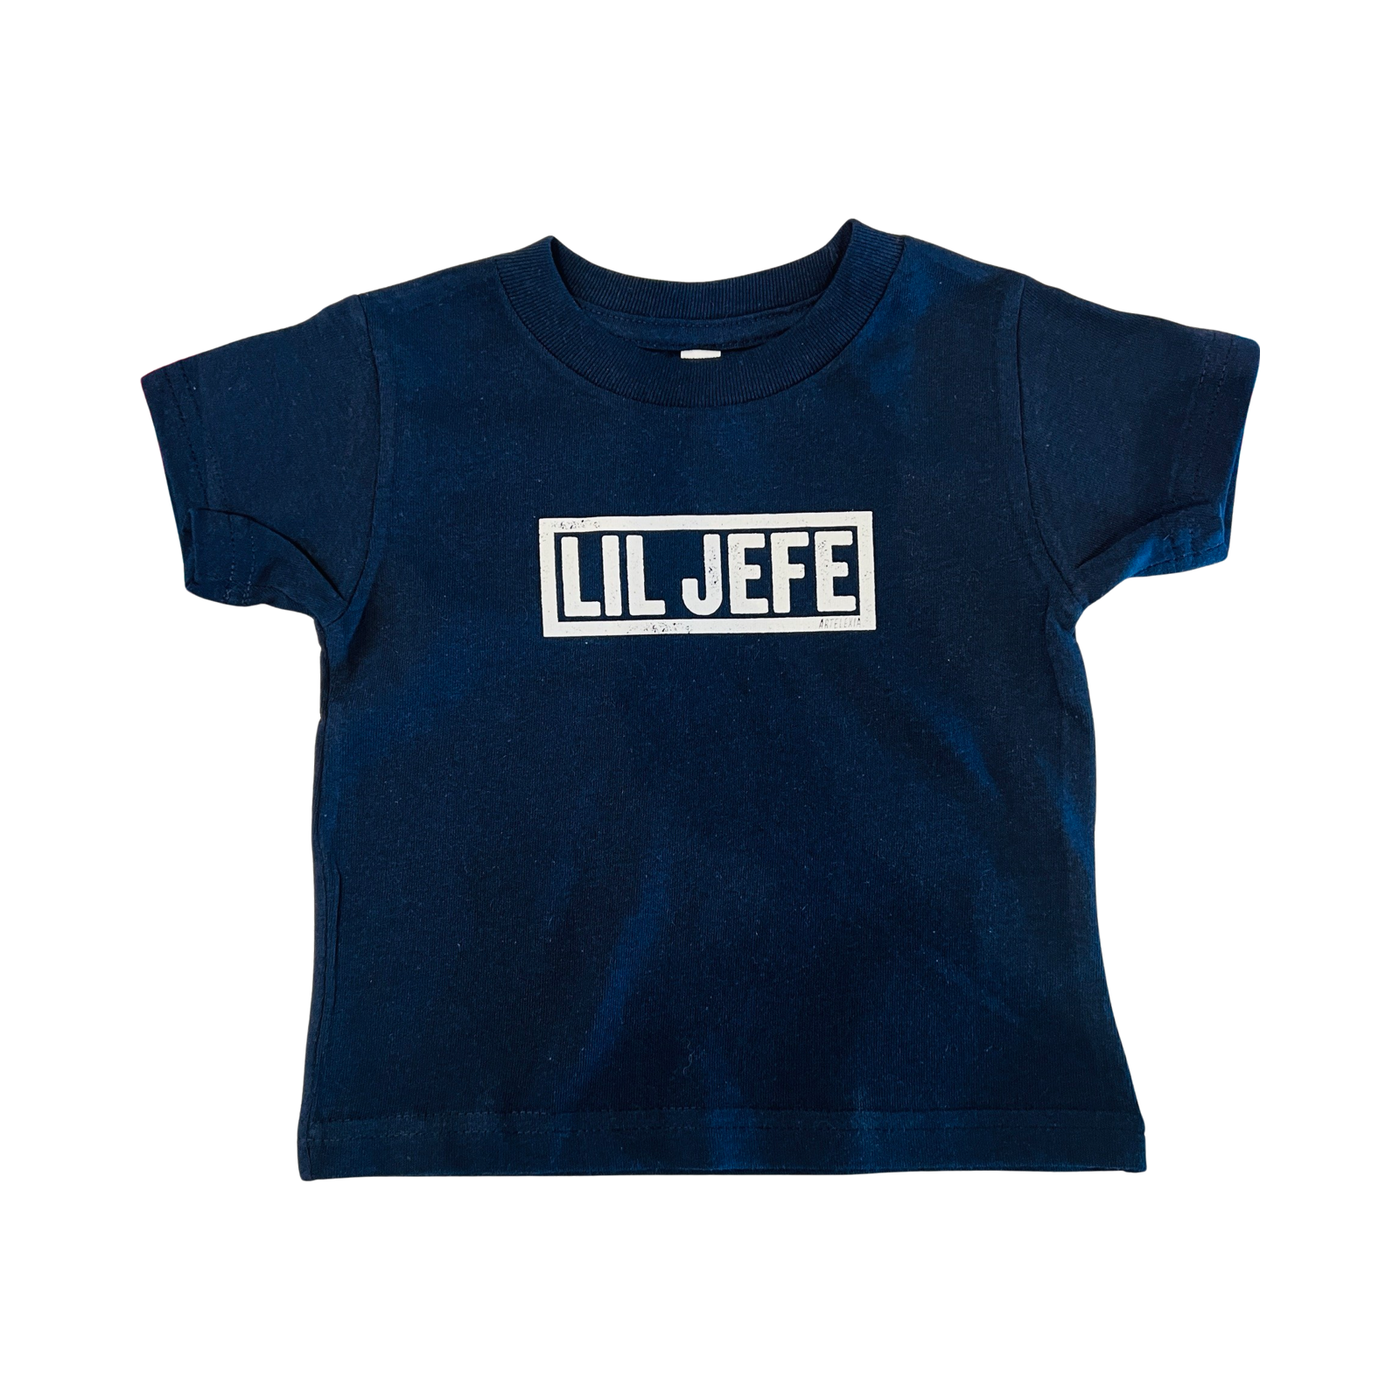 Dark navy blue shirt with the phrase Lil Jefe in white lettering